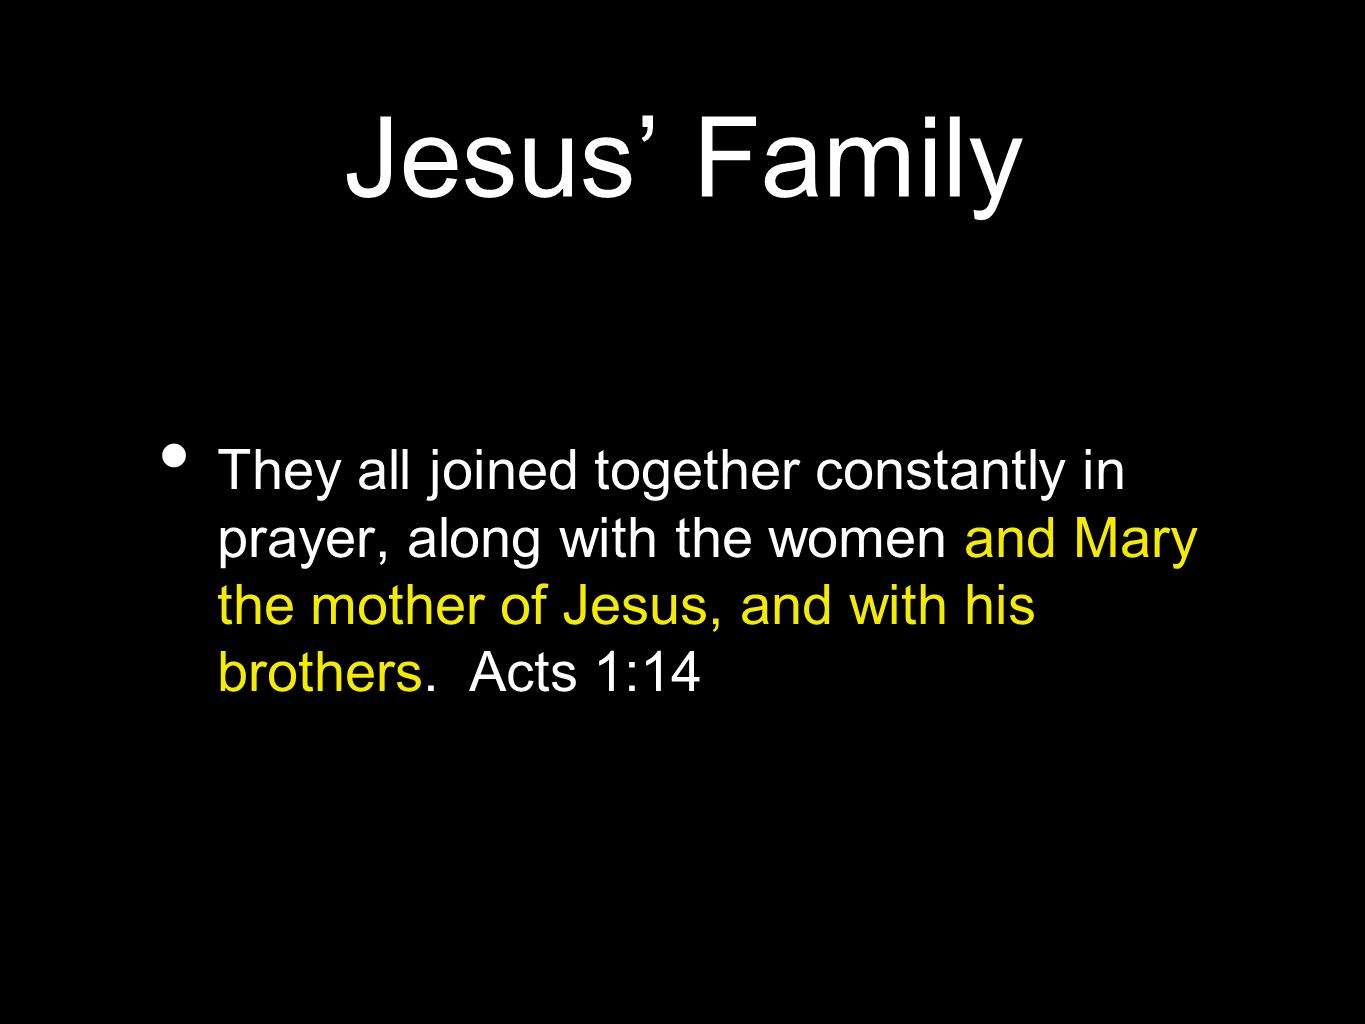 Jesus’ Family They all joined together constantly in prayer, along with the women and Mary the mother of Jesus, and with his brothers.